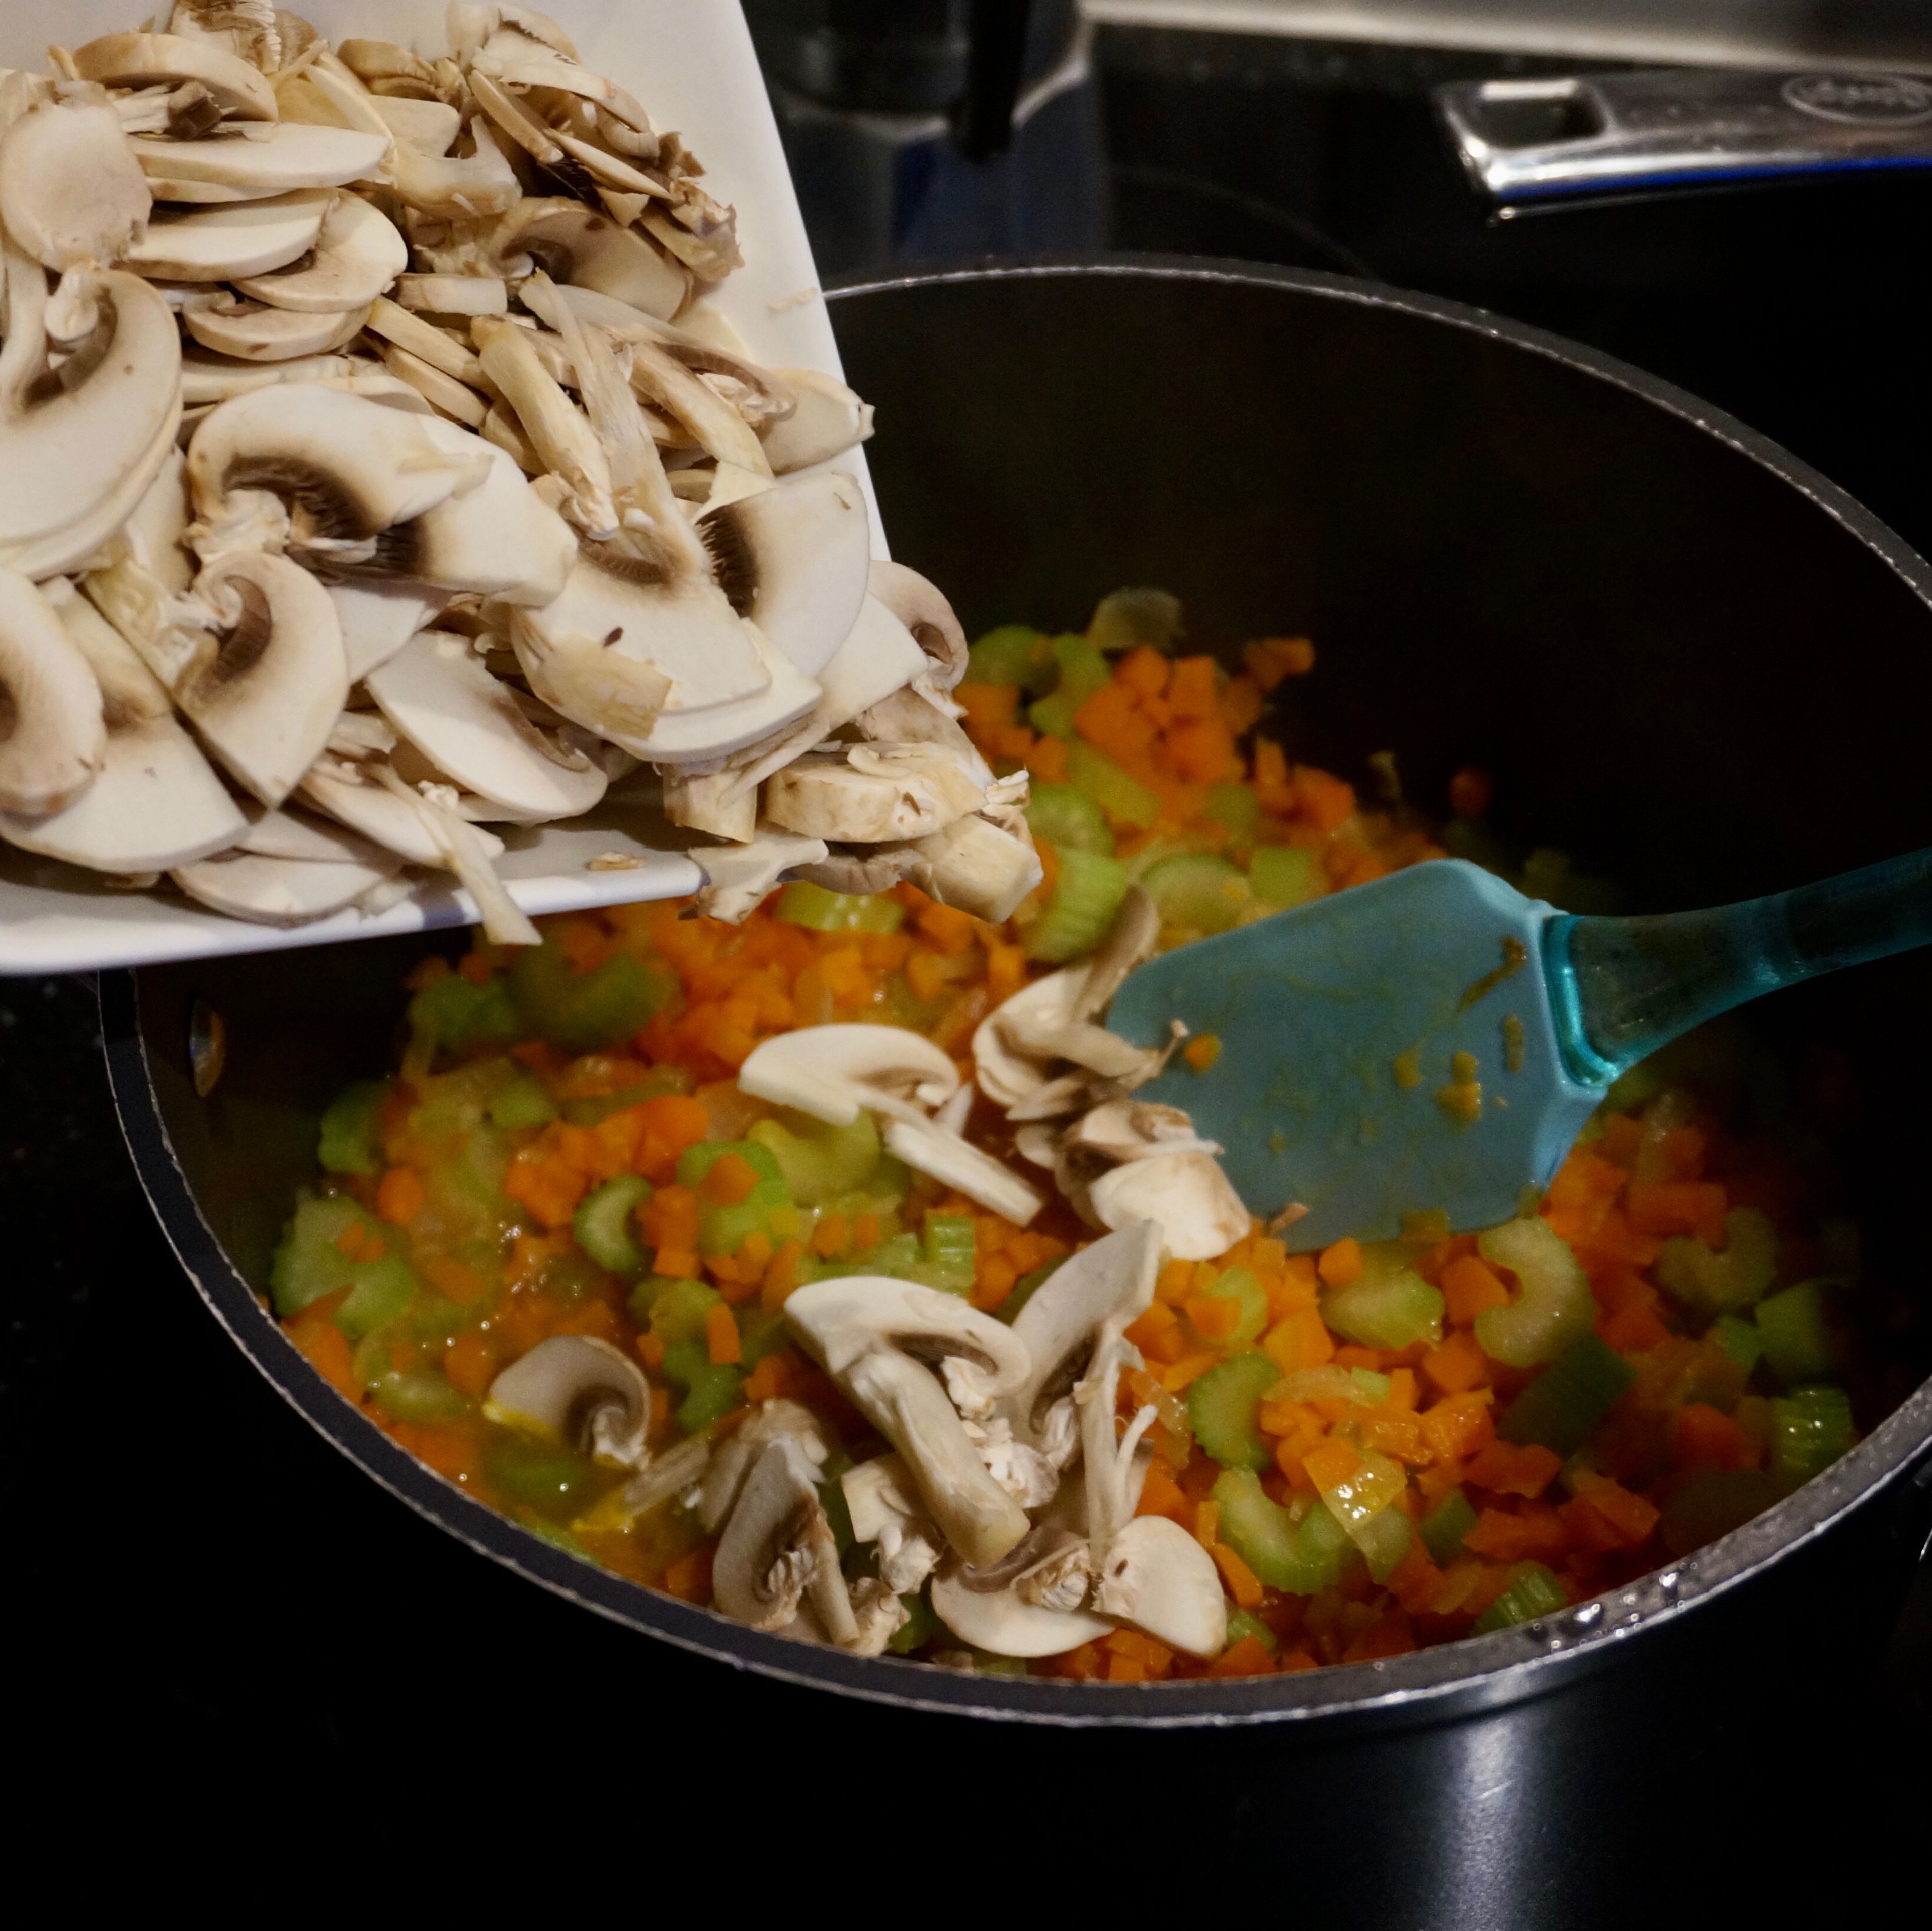 Cut the mushrooms into thin slices, add to the saucepan.